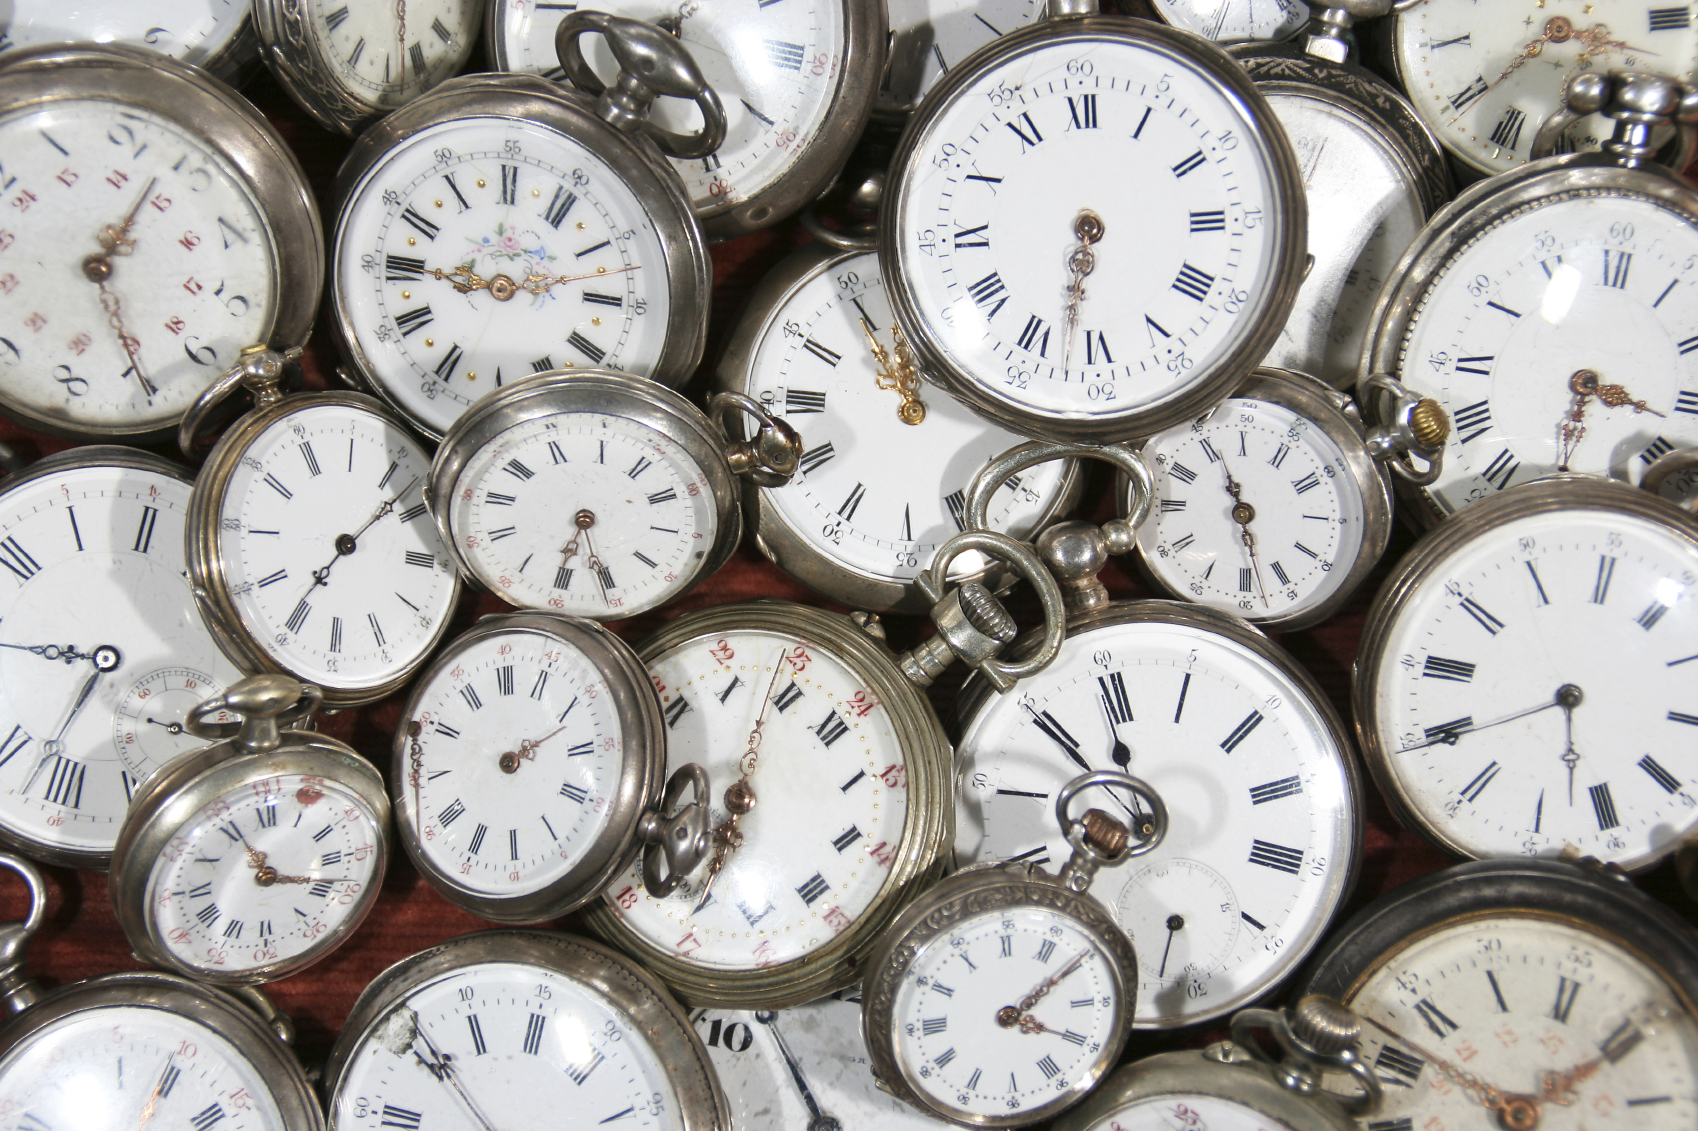 Collection of Pocket Watches - iStock_000009867834_Medium